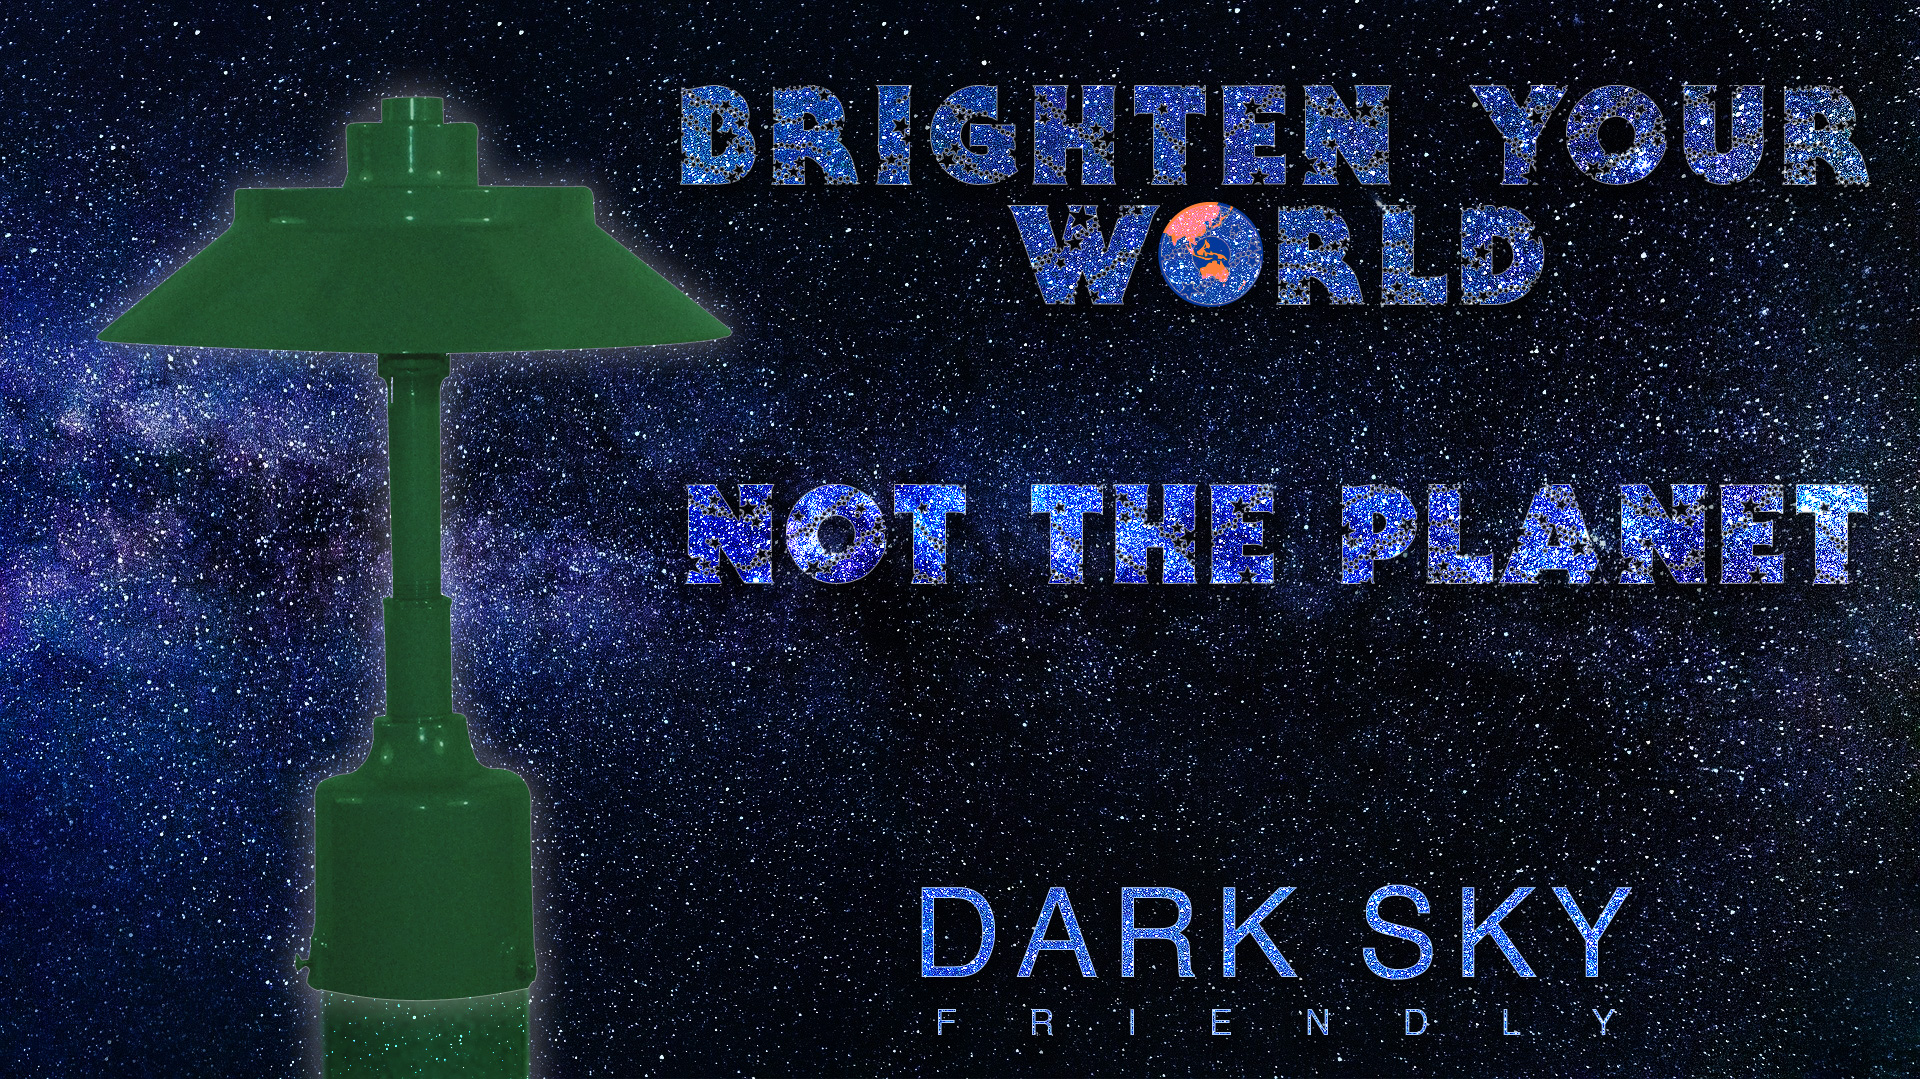 Brighten your world, not the planet